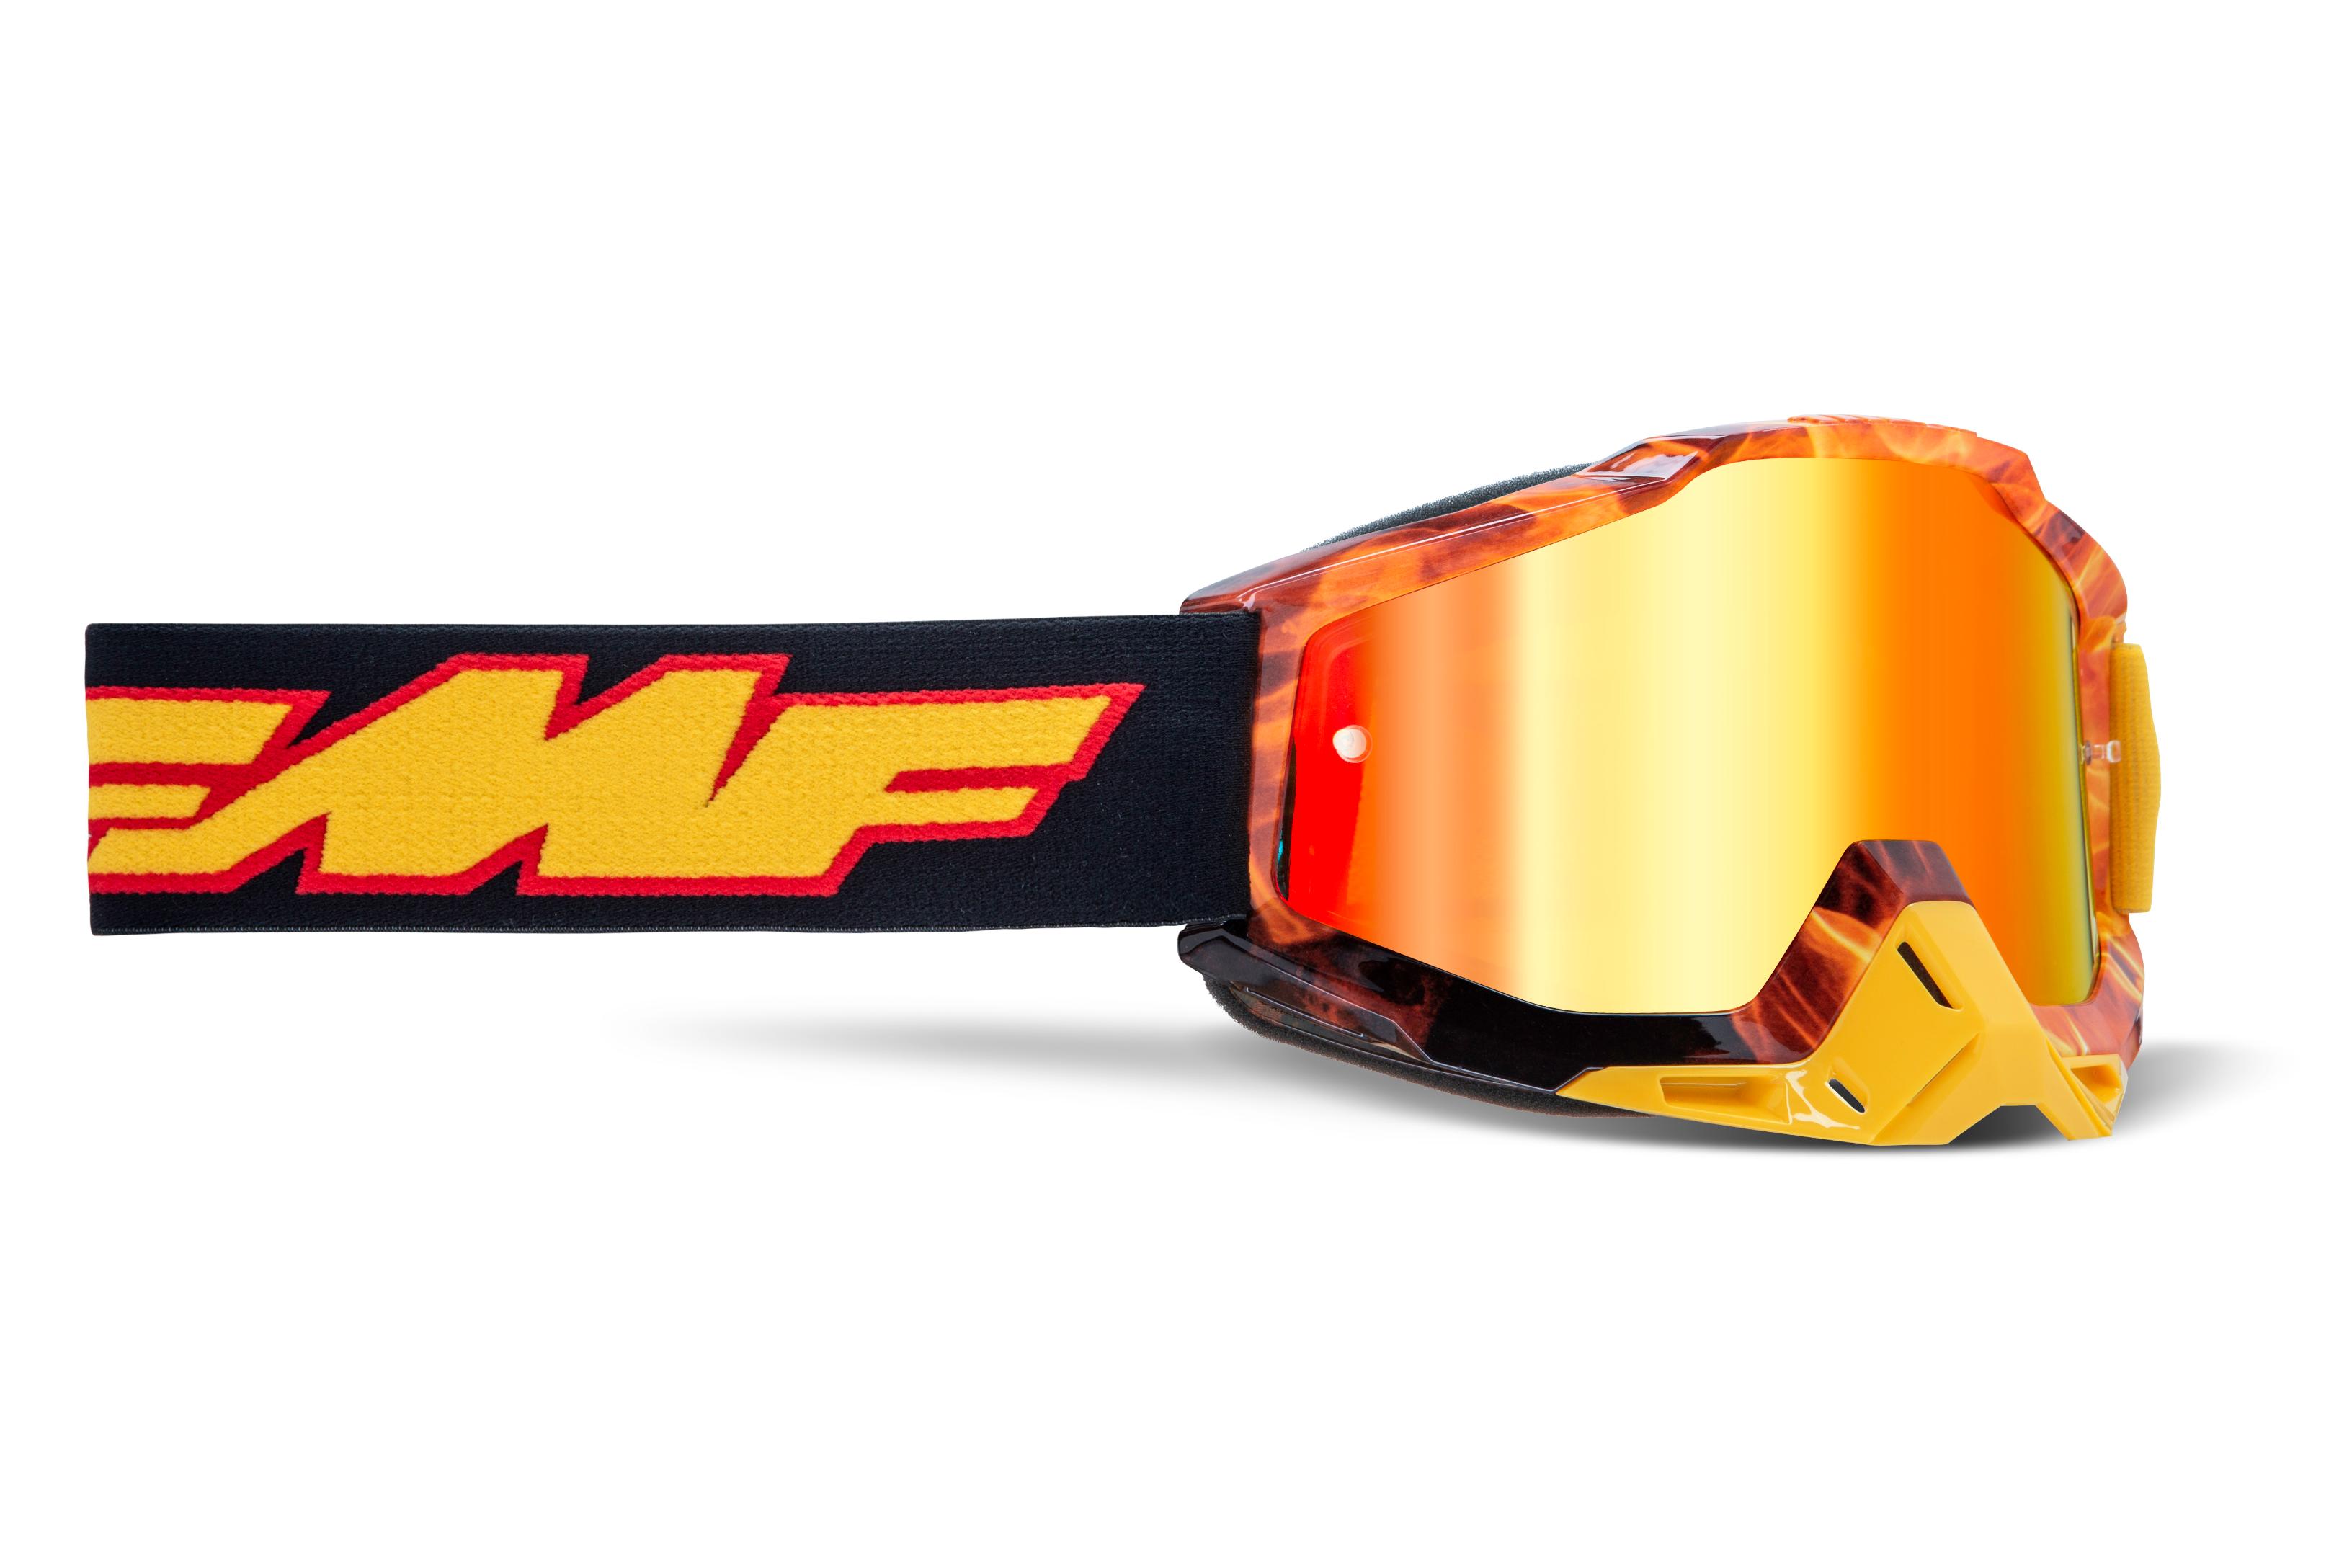 Fmf Vision - Powerbomb Goggle Spark Mirror Red Lens - F-50037-00005